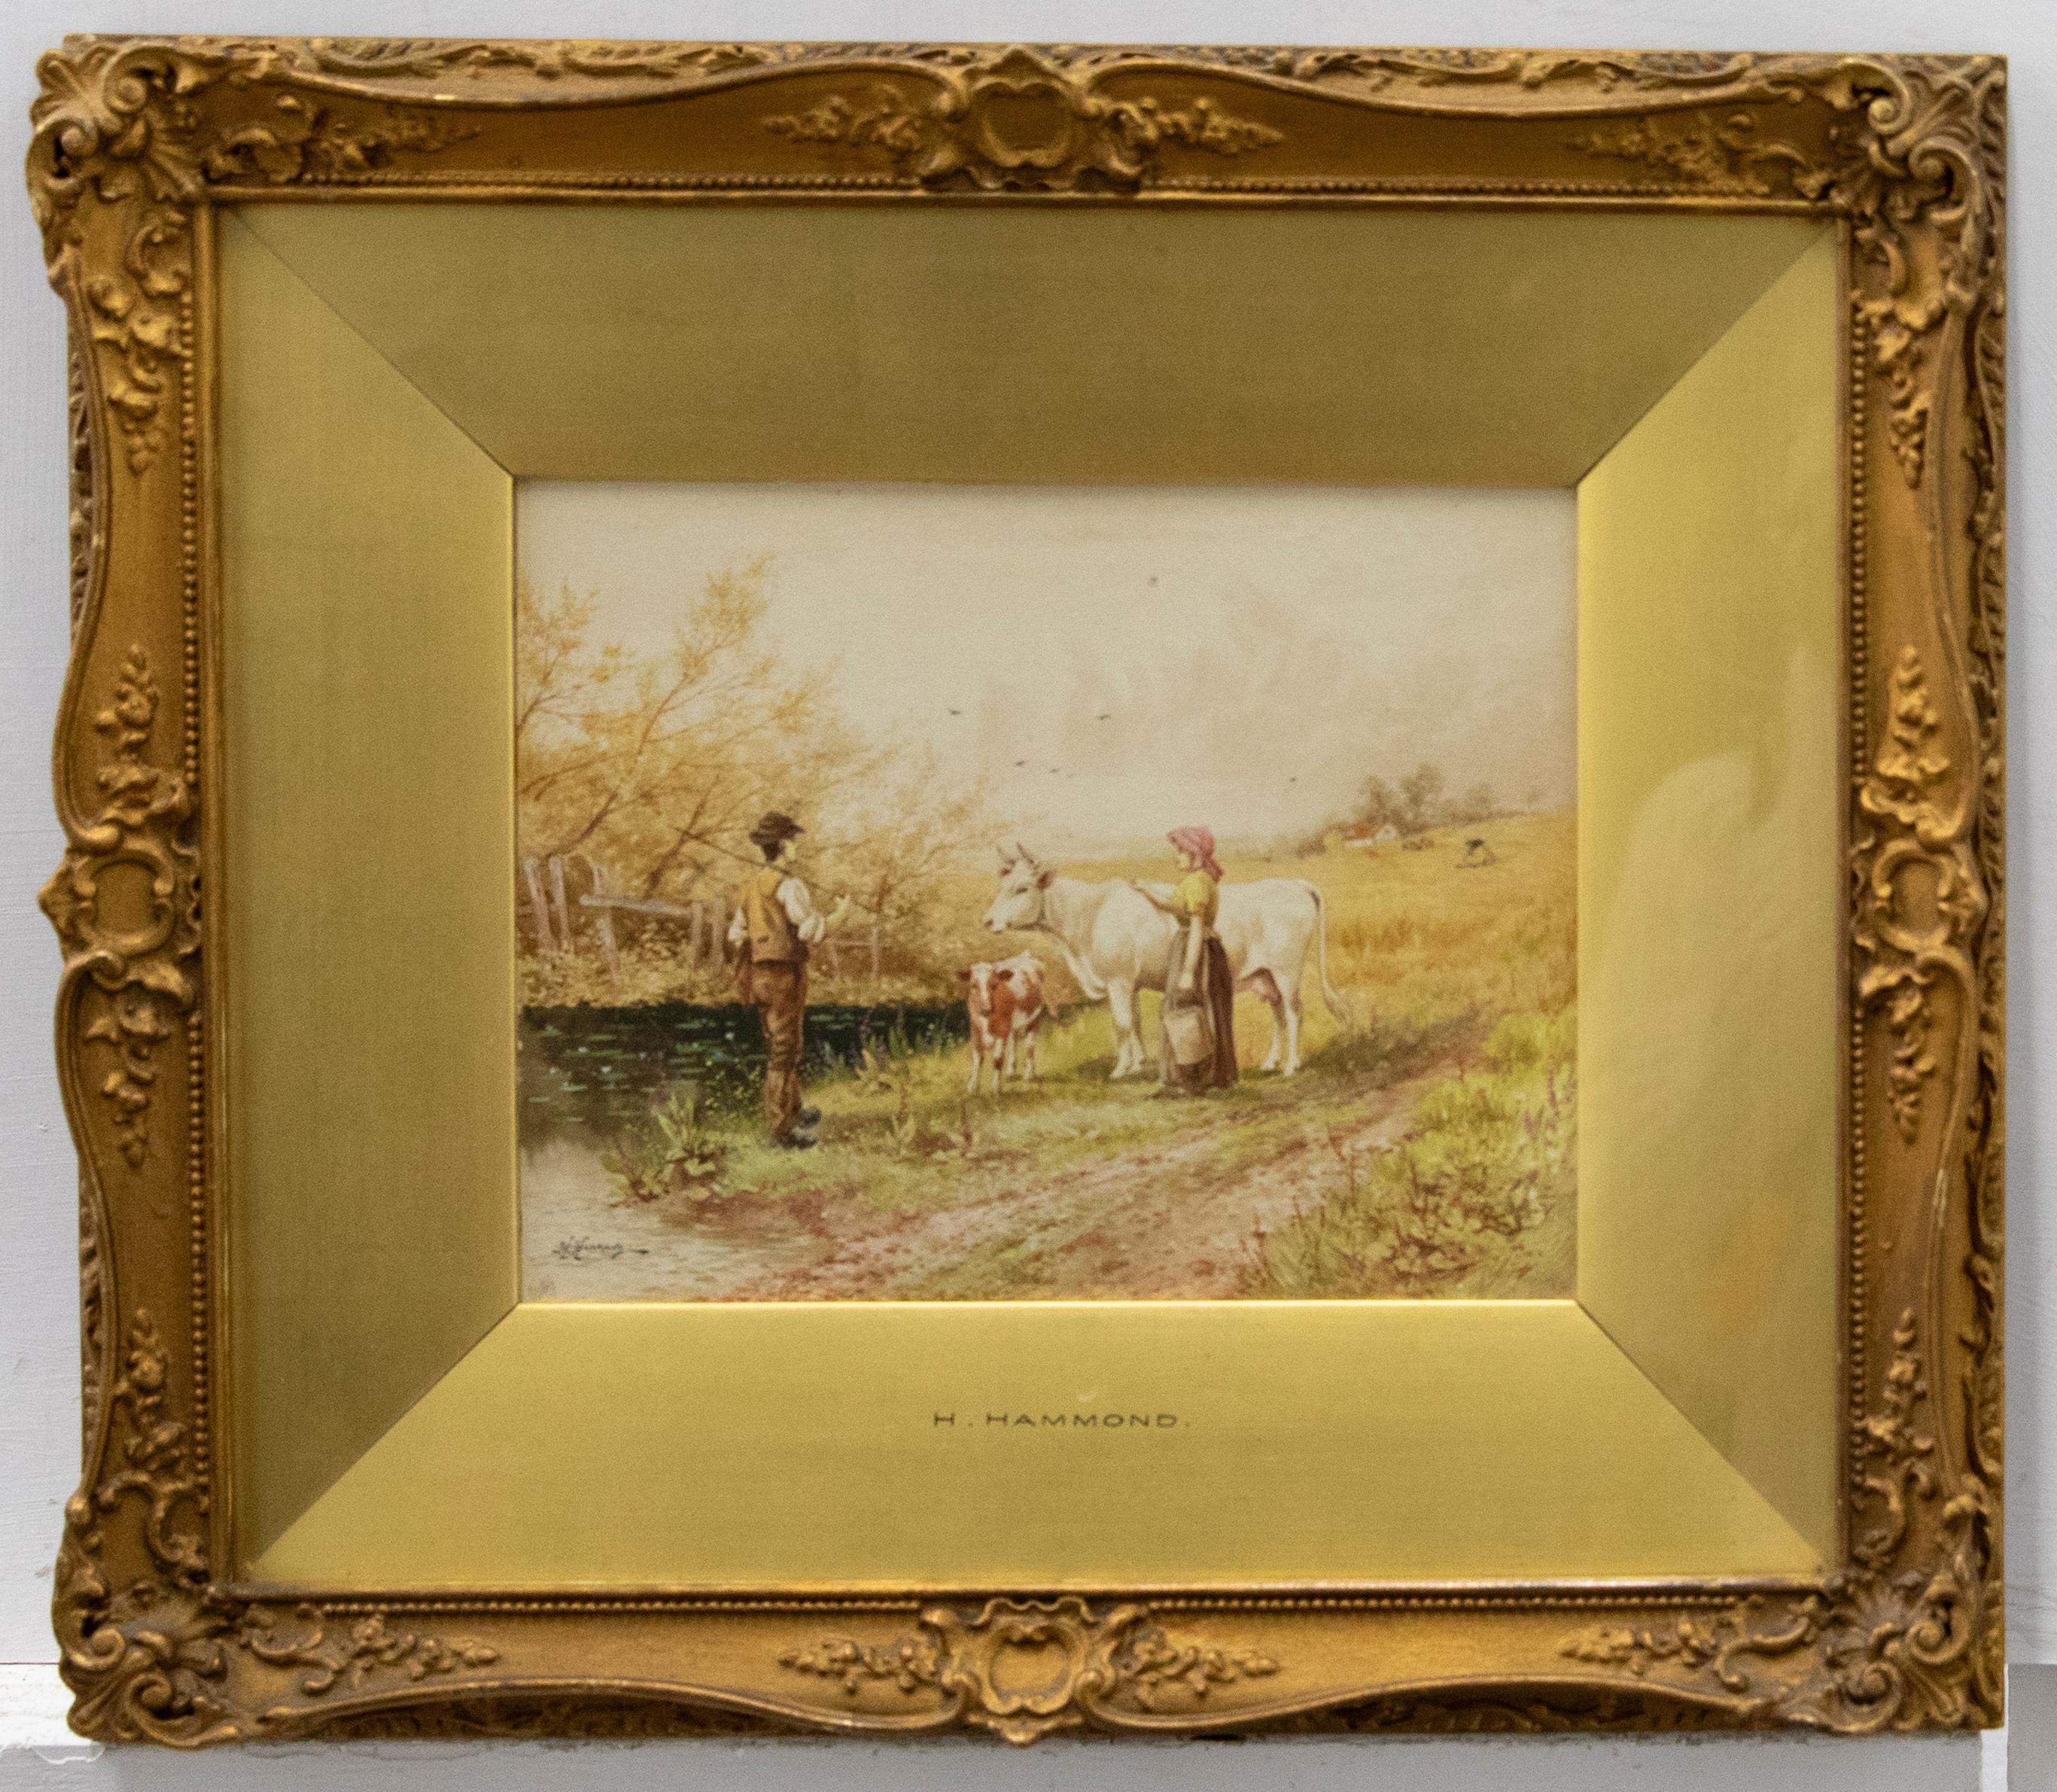 Unknown Landscape Art - Horace Hammond (1842-1926) - Framed Watercolour, Figures in Passing